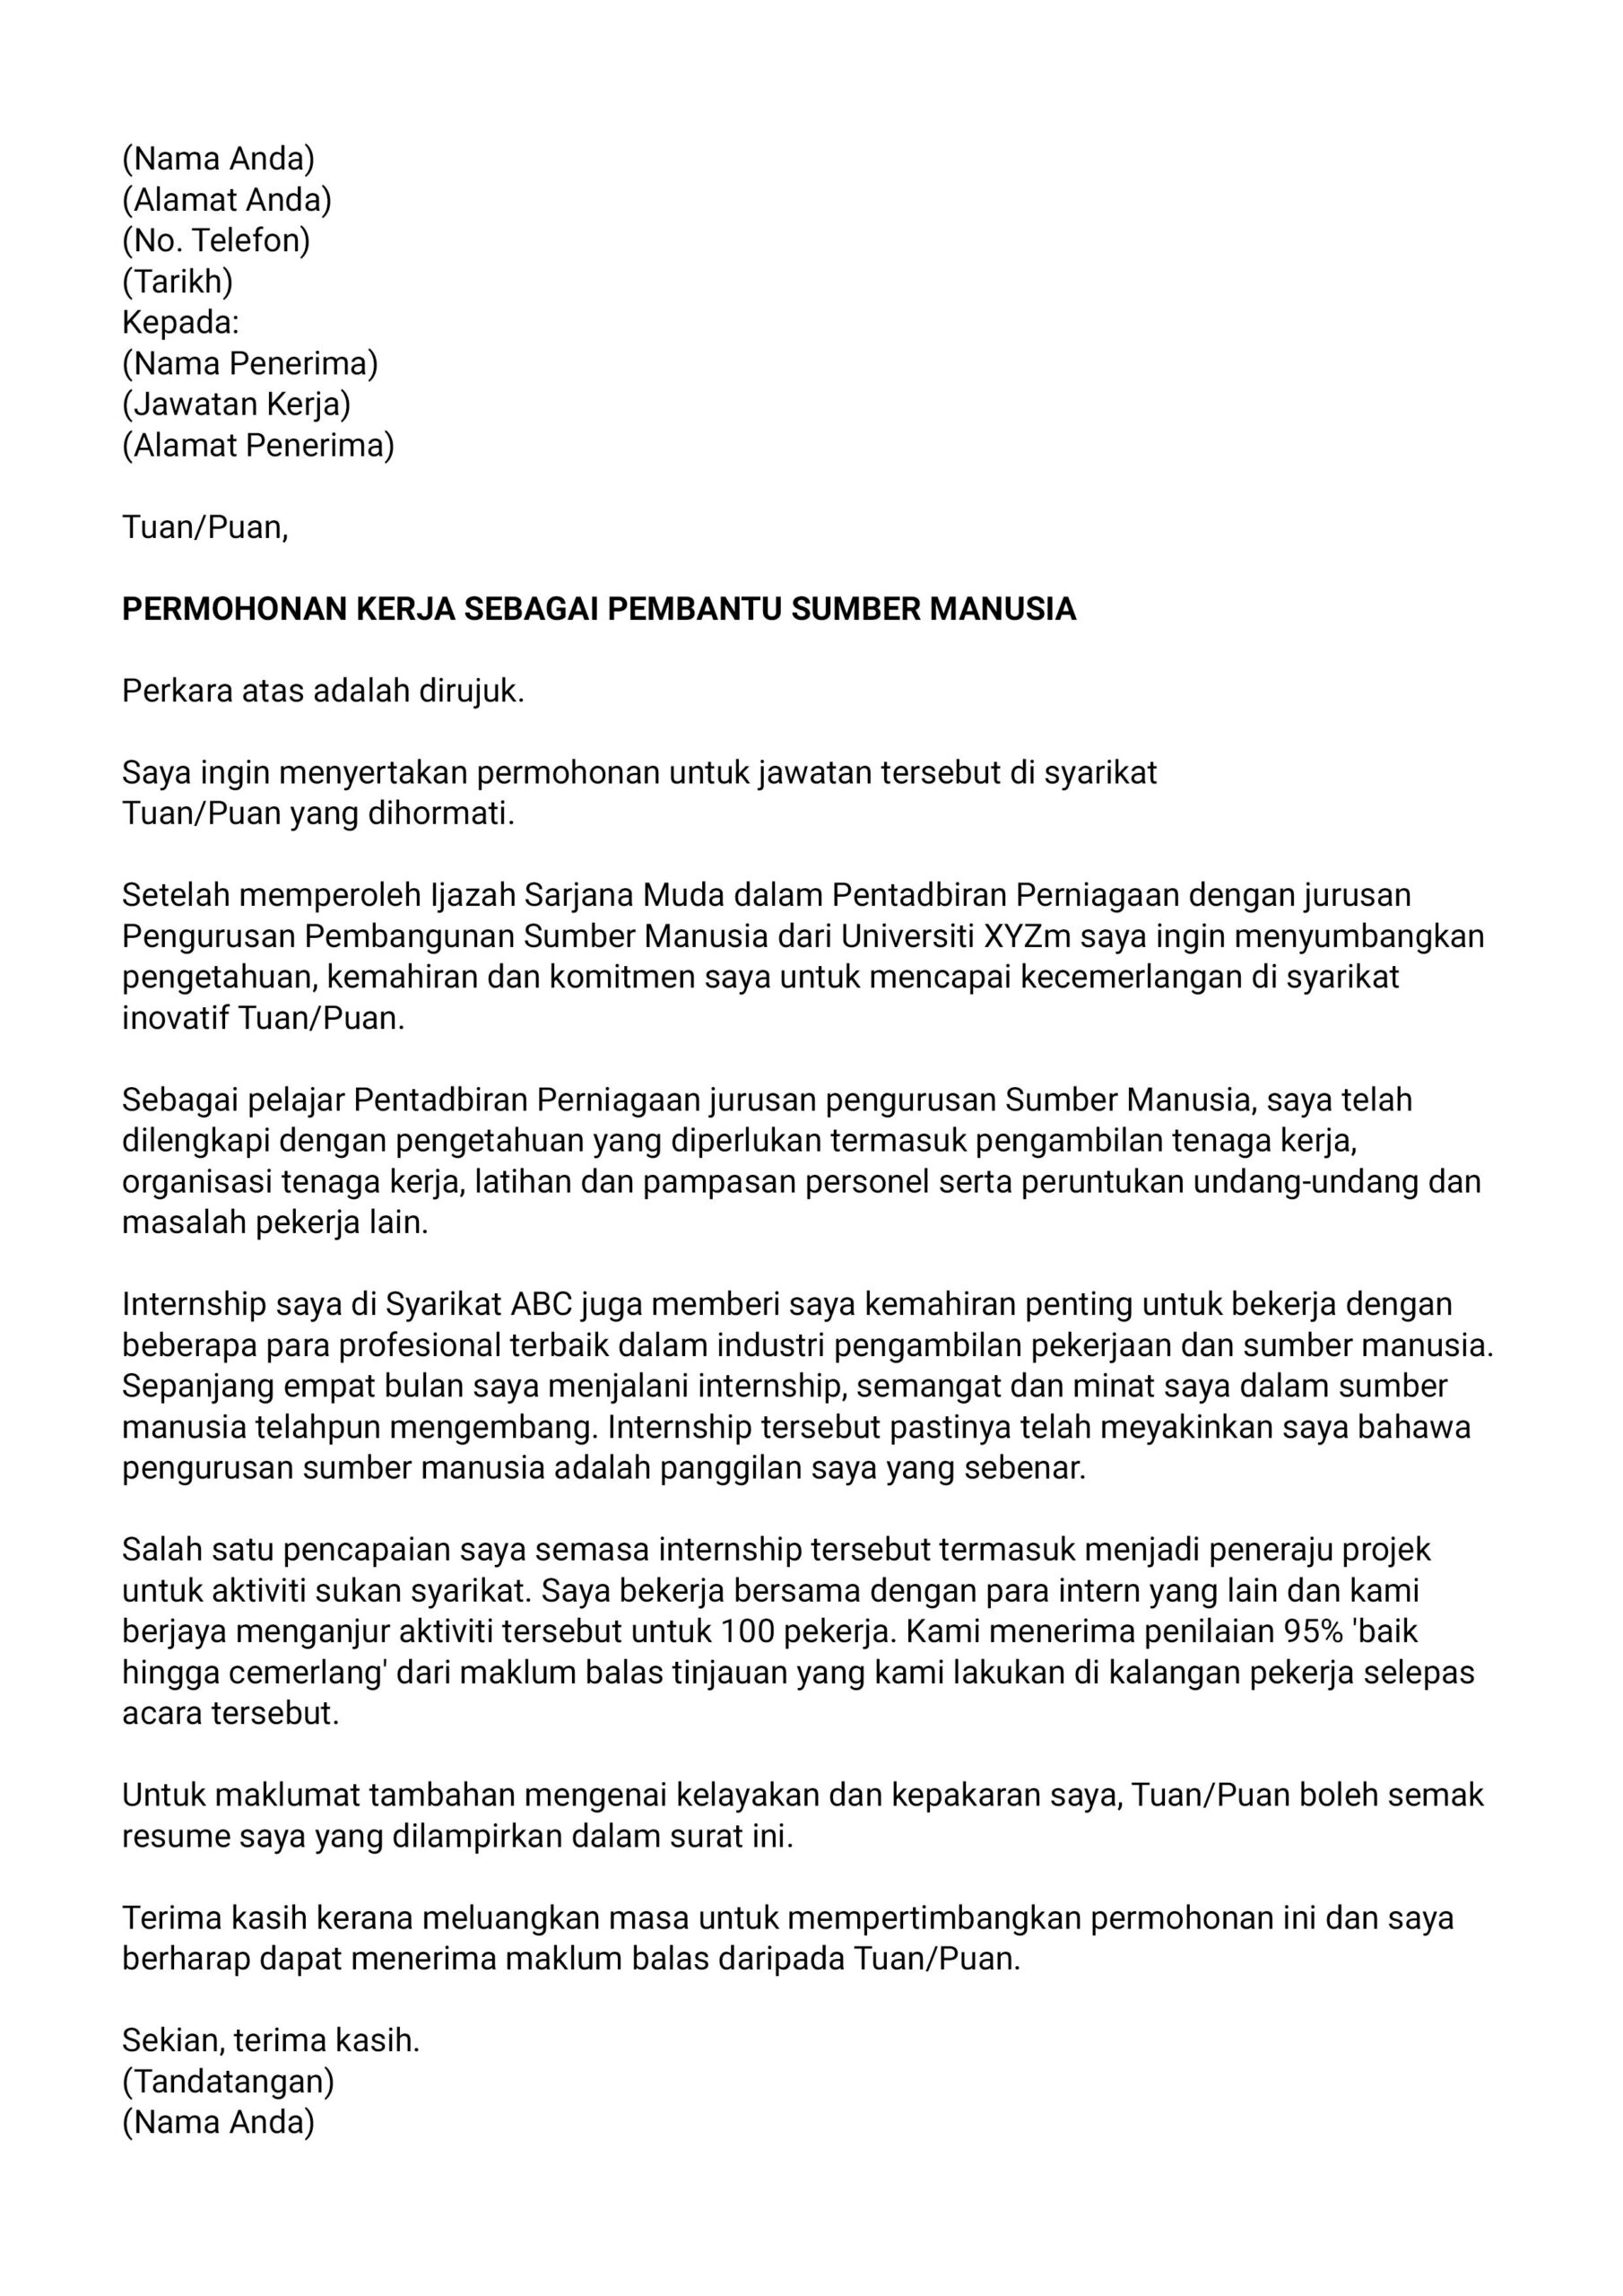 cover letter bahasa melayu email